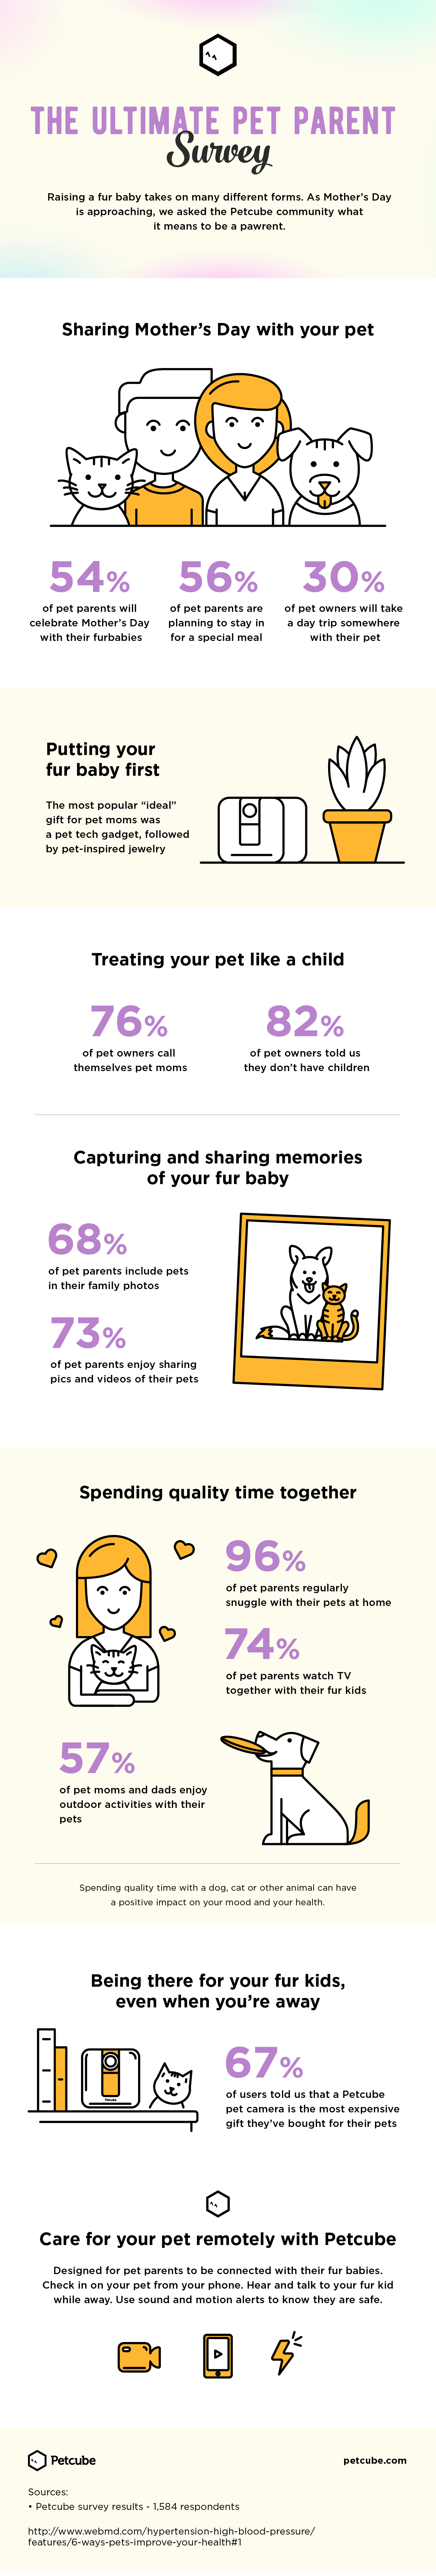 The Ultimate Pet Parent Infographic